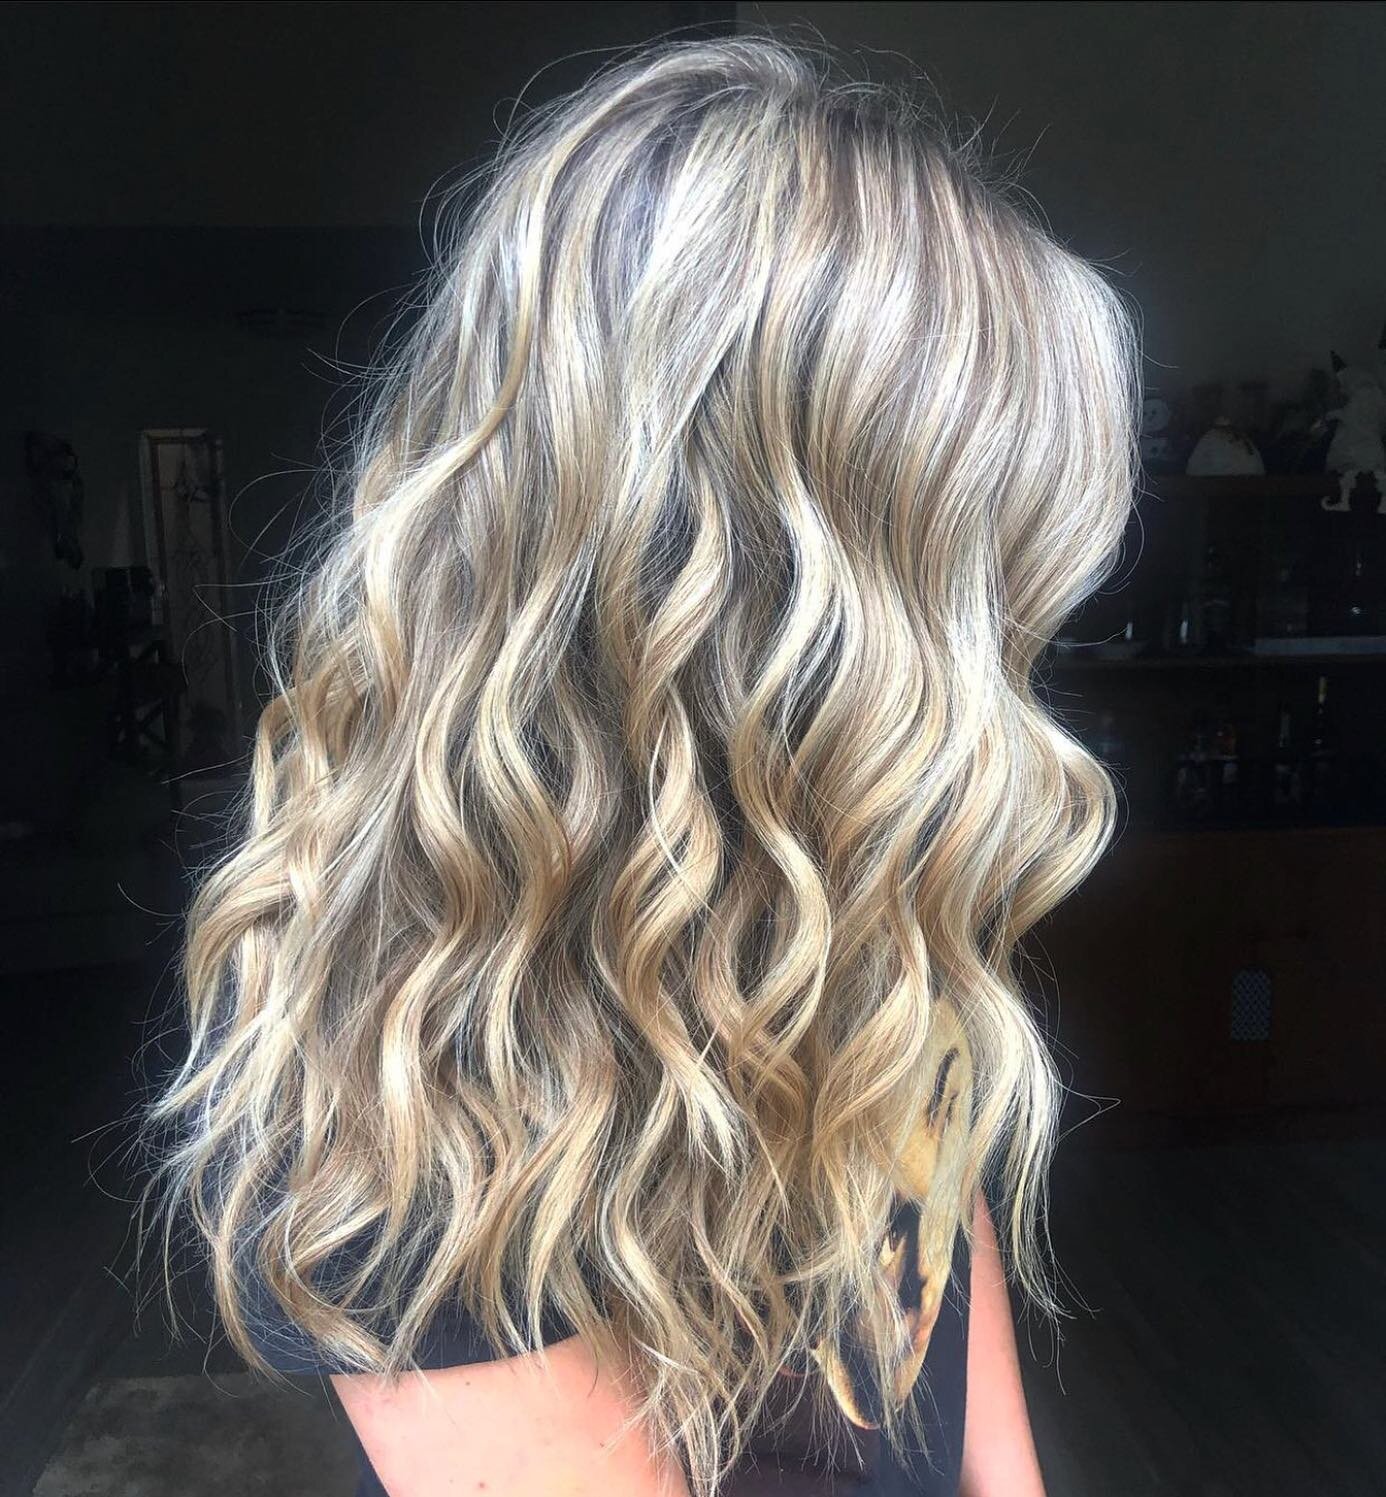 ✨glowing✨
By @dmintz_beauty

Studio 55 Salons is a premier provider of private salon suites in Sacramento, Roseville and Folsom. 

#studio55salons